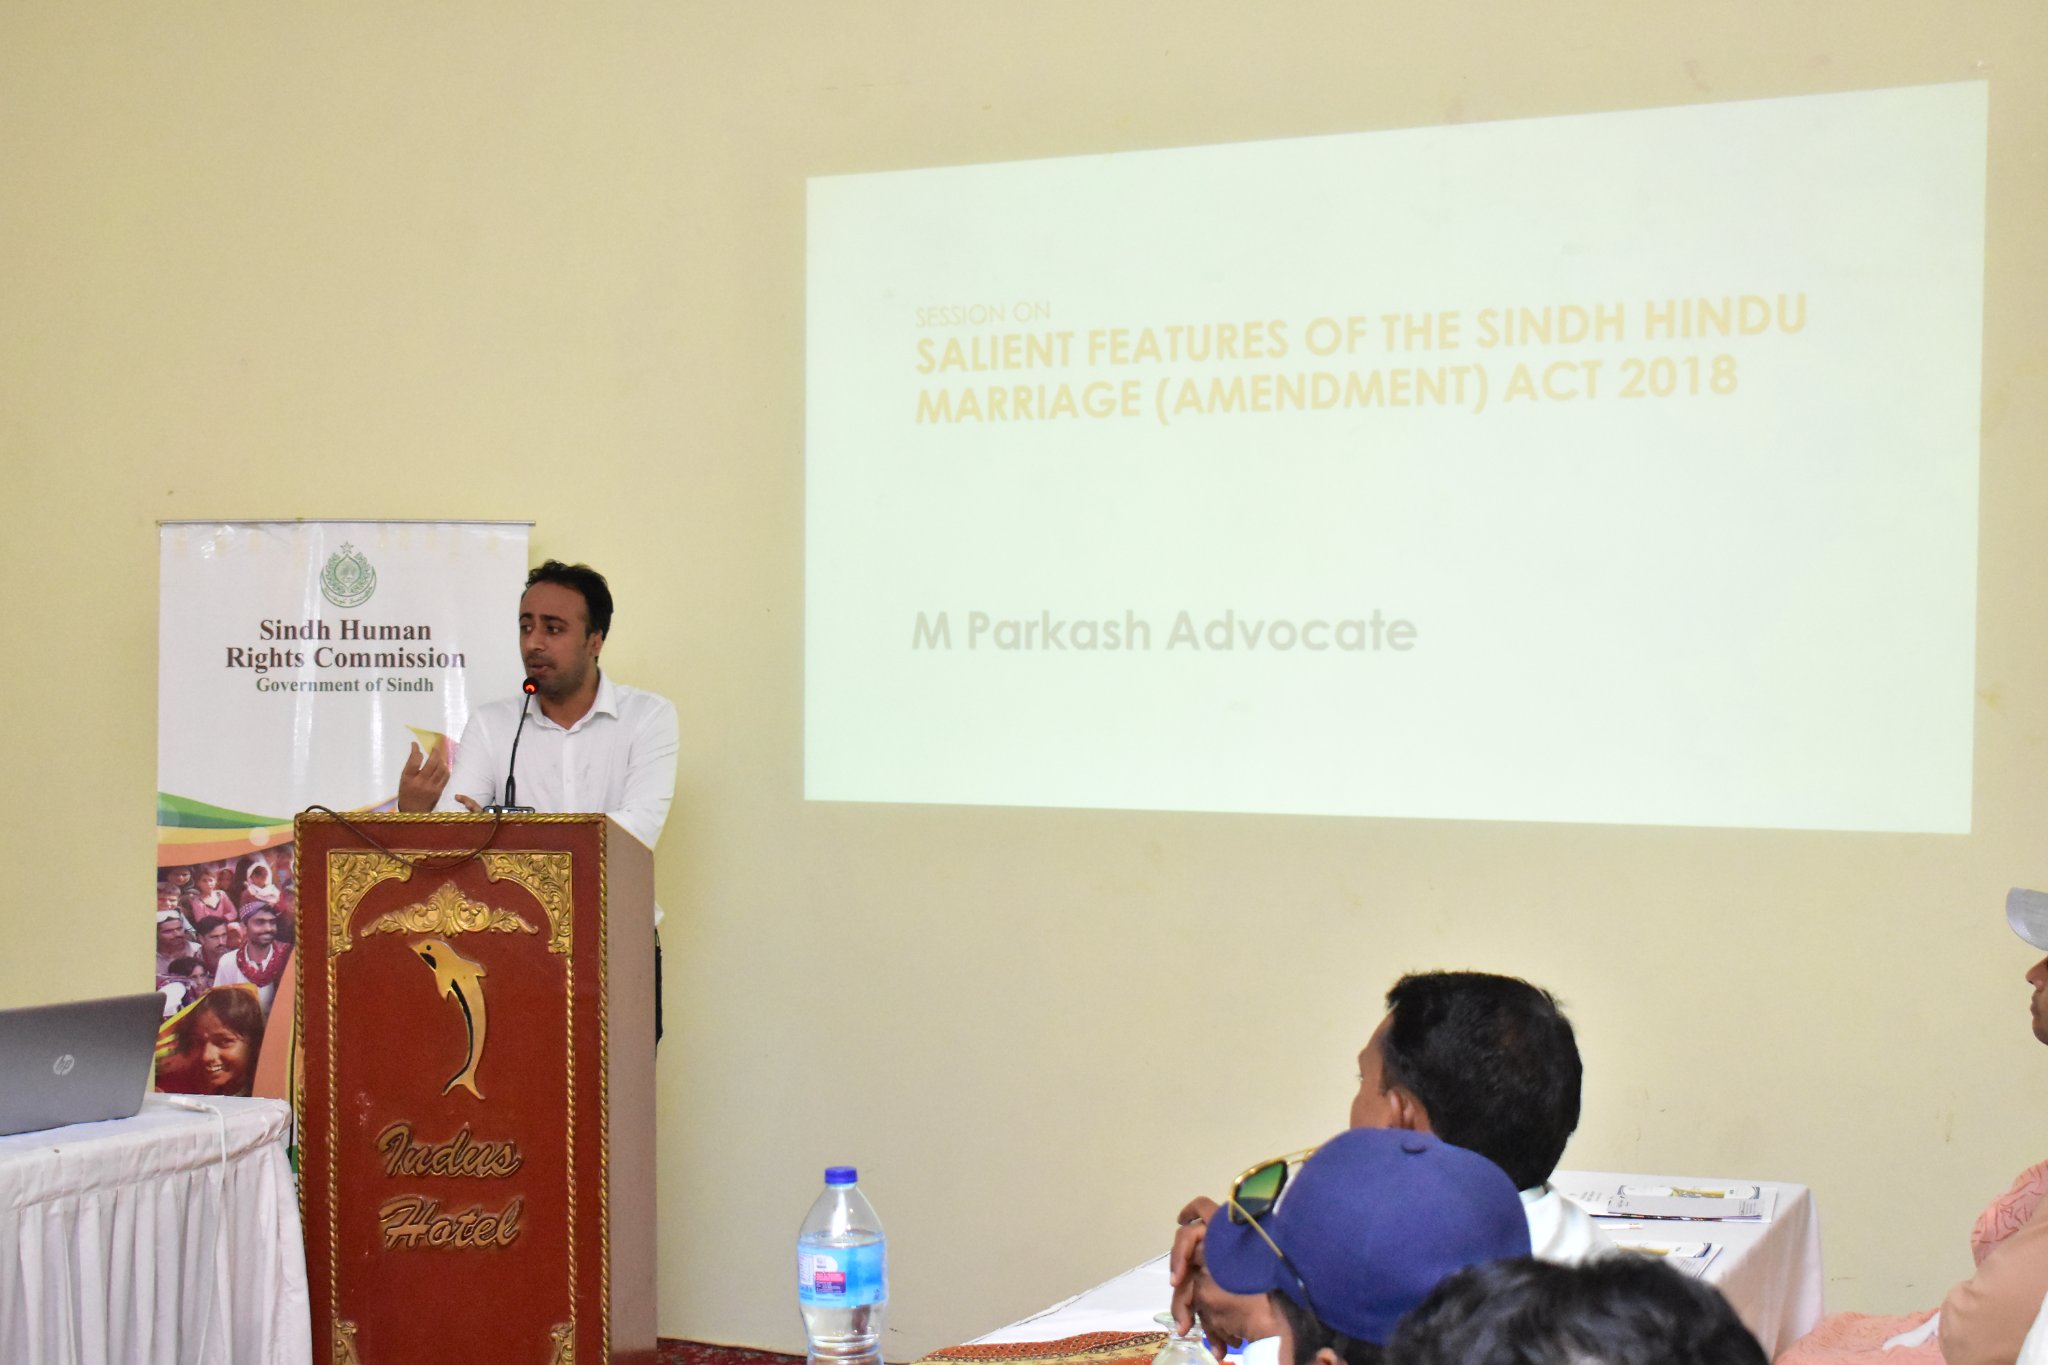 Training on The Sindh Hindu Marriage Act 2018